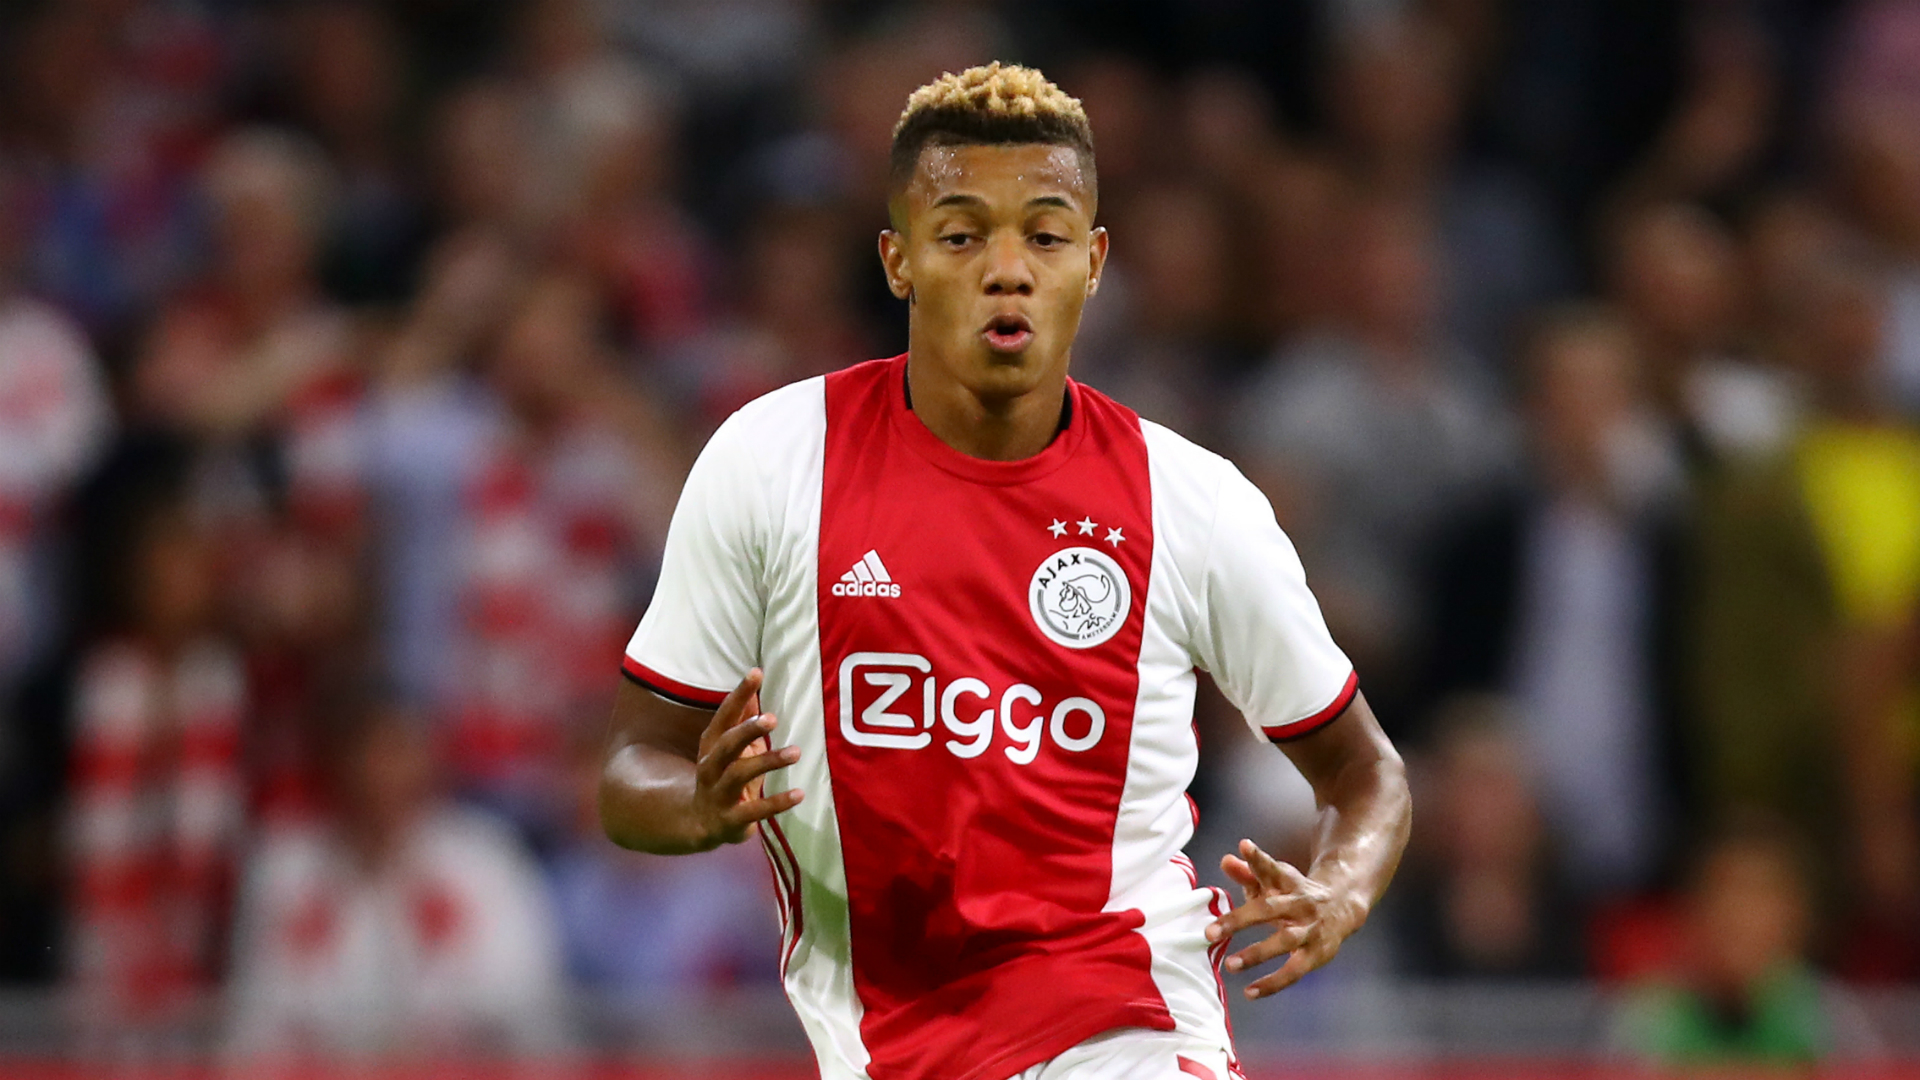 David Neres has featured regularly for Ajax this term but is out until 2020 in what boss Erik ten Hag described as a "major blow".